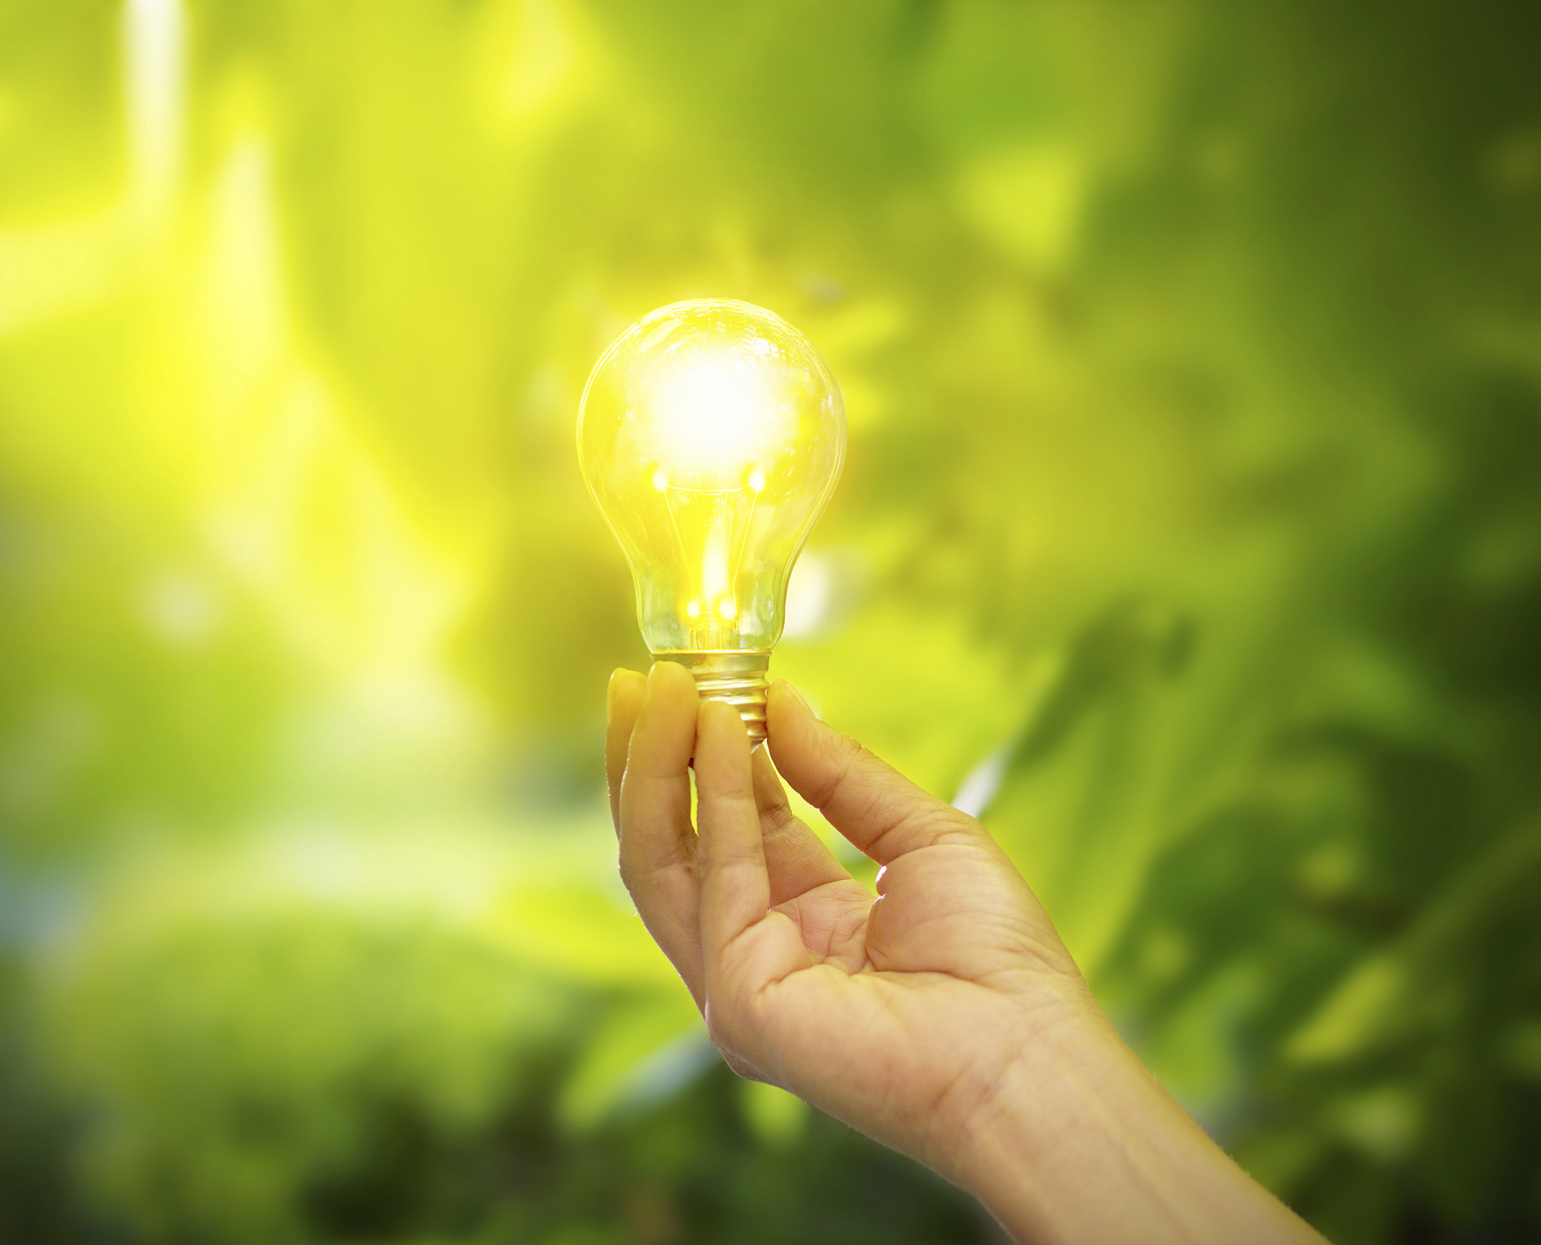 hand holding a light bulb with energy on fresh green